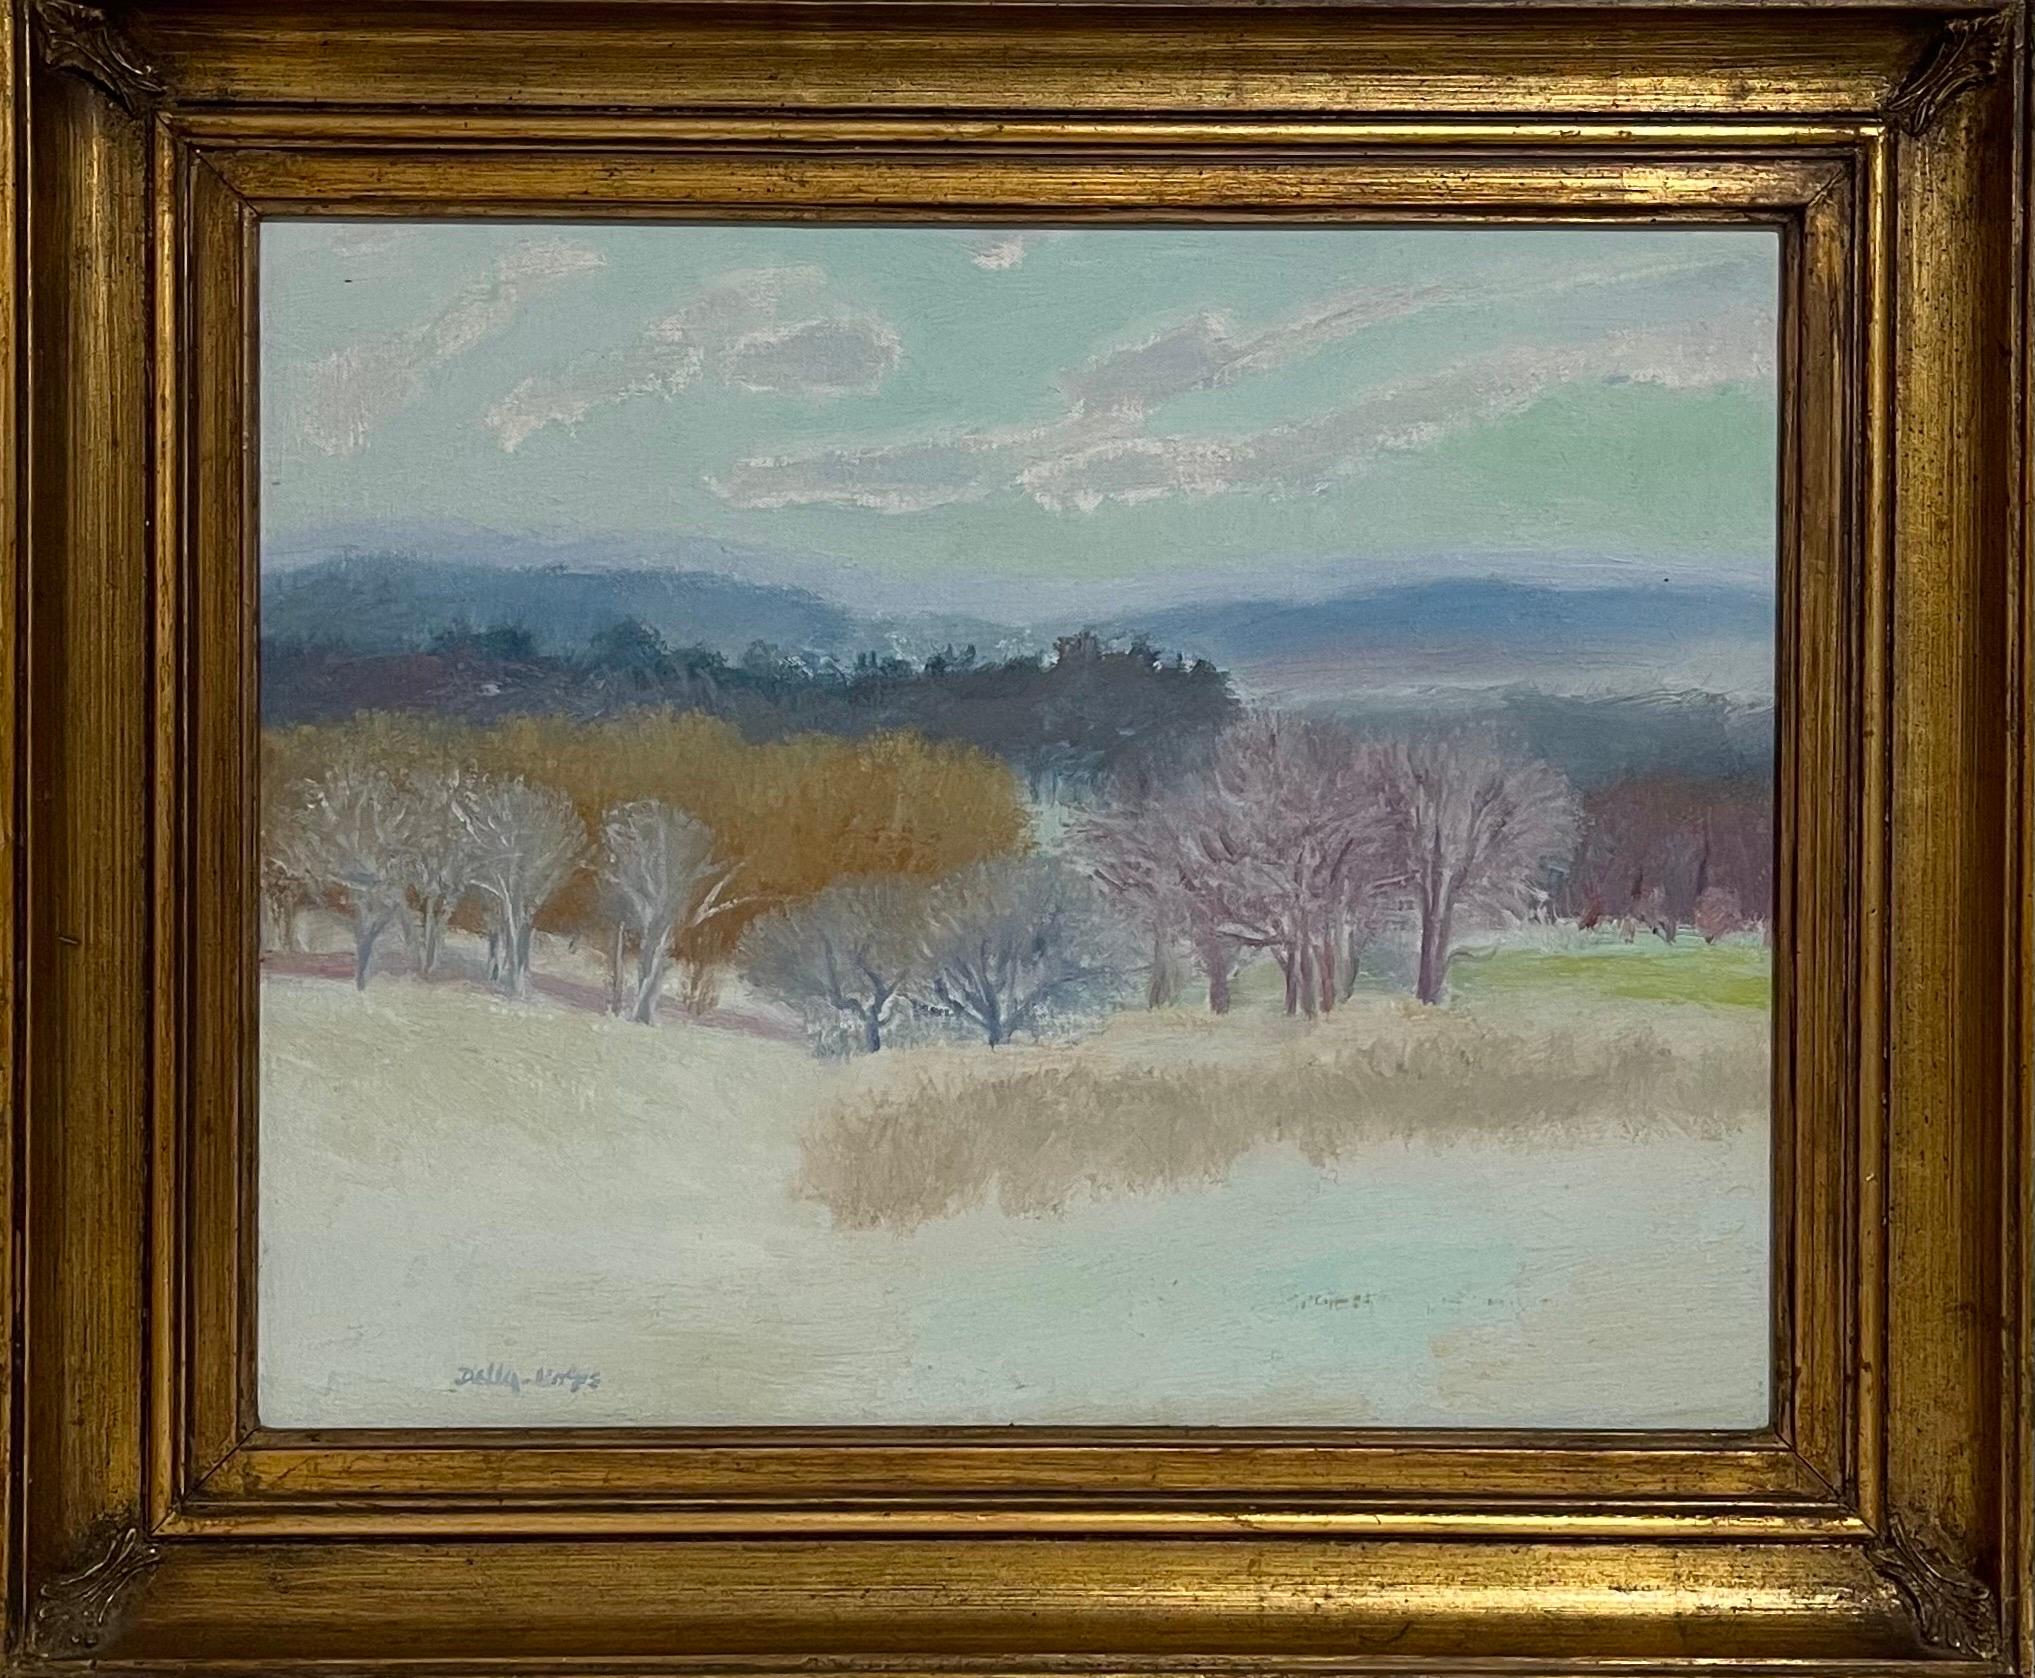 RALPH DELLA-VOLPE  (1923-2017)
Fine Art Painter, American Contemporary  
The Valley
Oil on canvas
Hand signed lower left and again to stretcher and verso
16 x 20 inches. frame dimensions: 22 1/4 x 26  inches, wood frame

Provenance: The Estate of